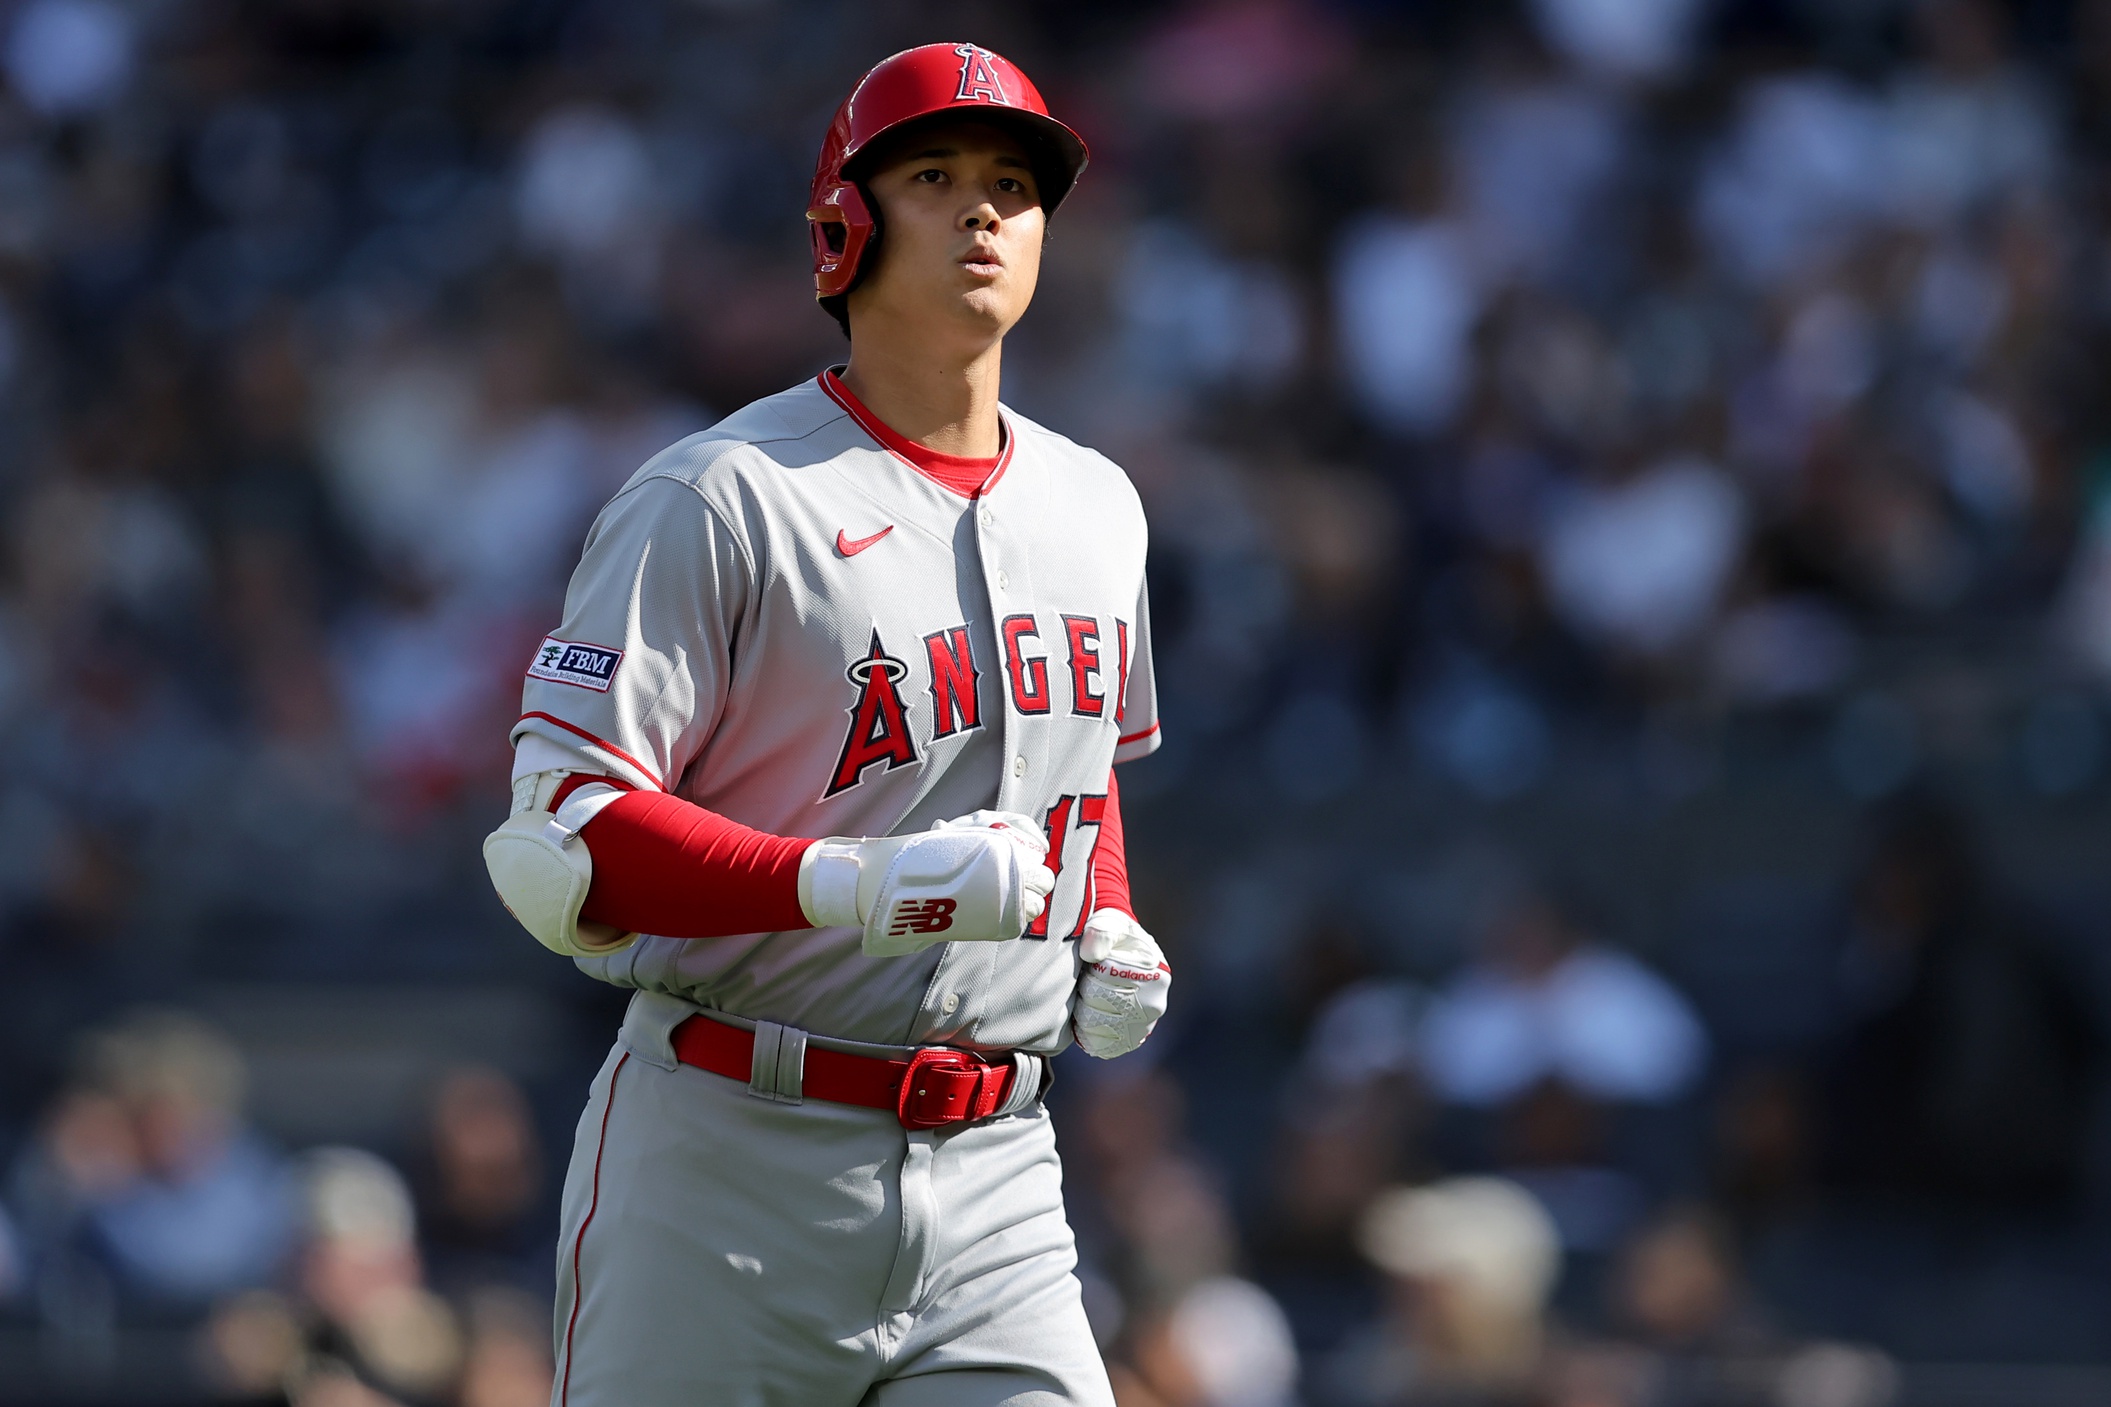 Noah's comment today : r/angelsbaseball